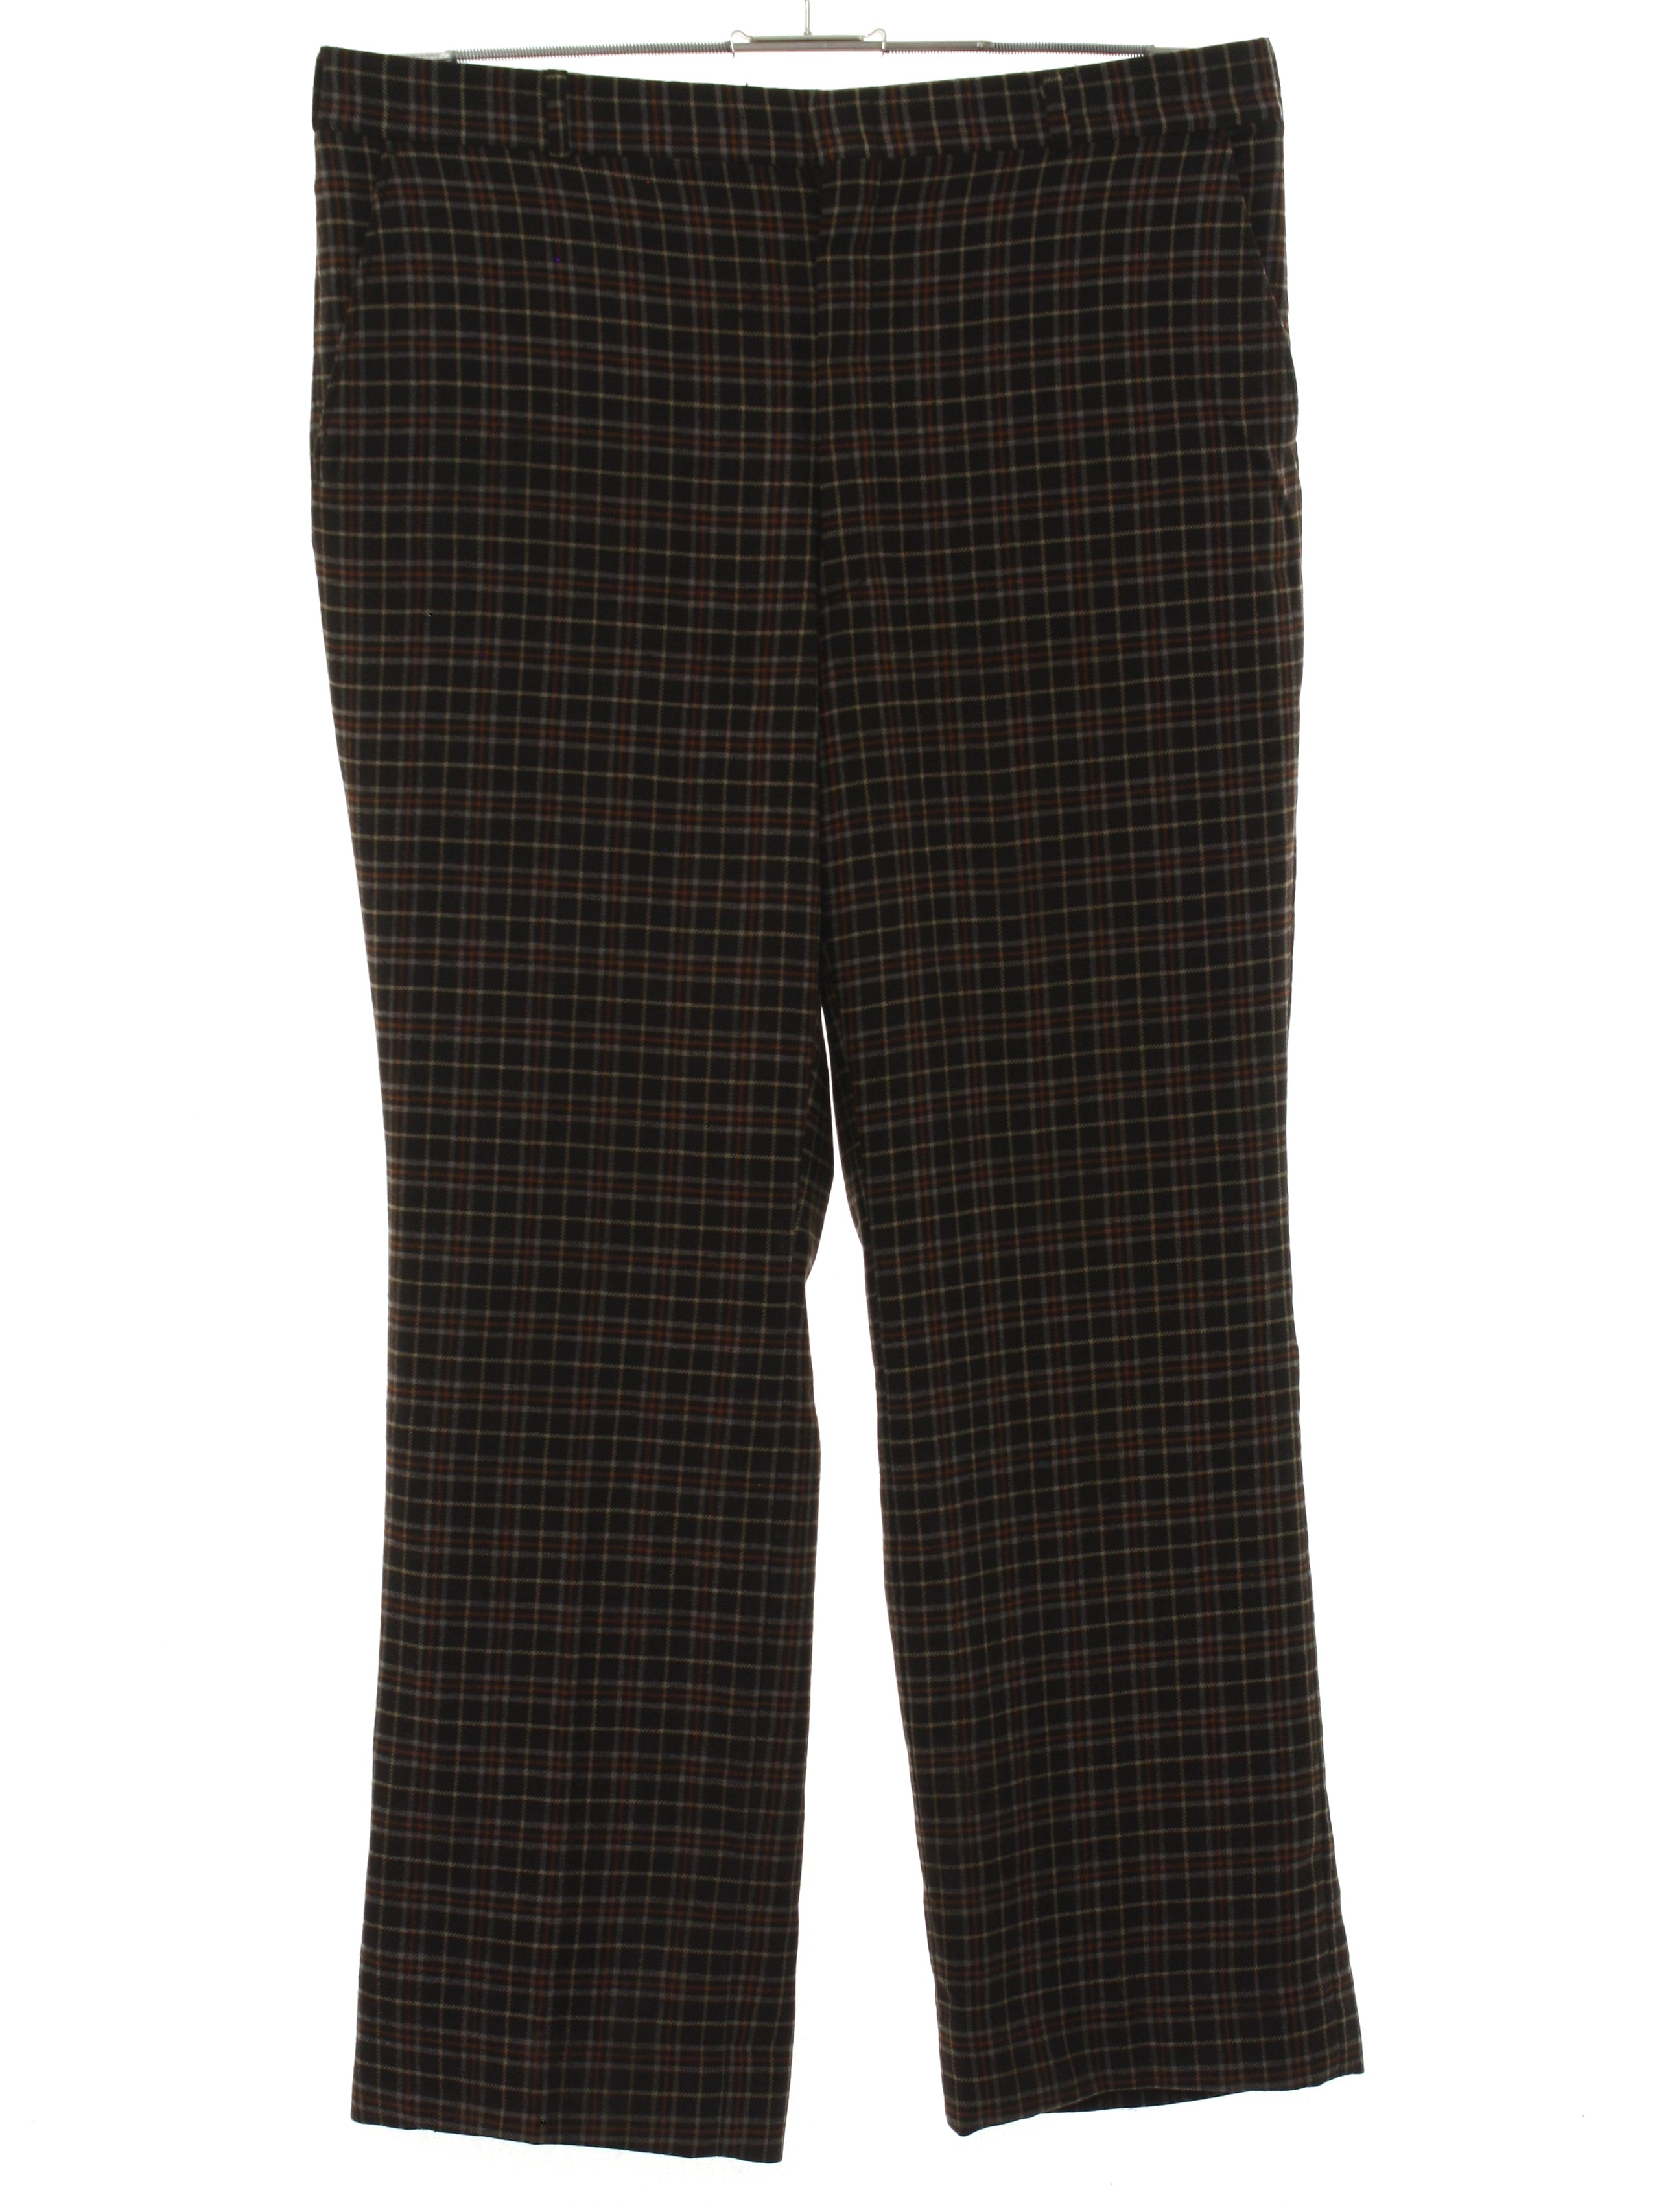 1970's Retro Flared Pants / Flares: 70s -Worlds Best- Mens brown ...